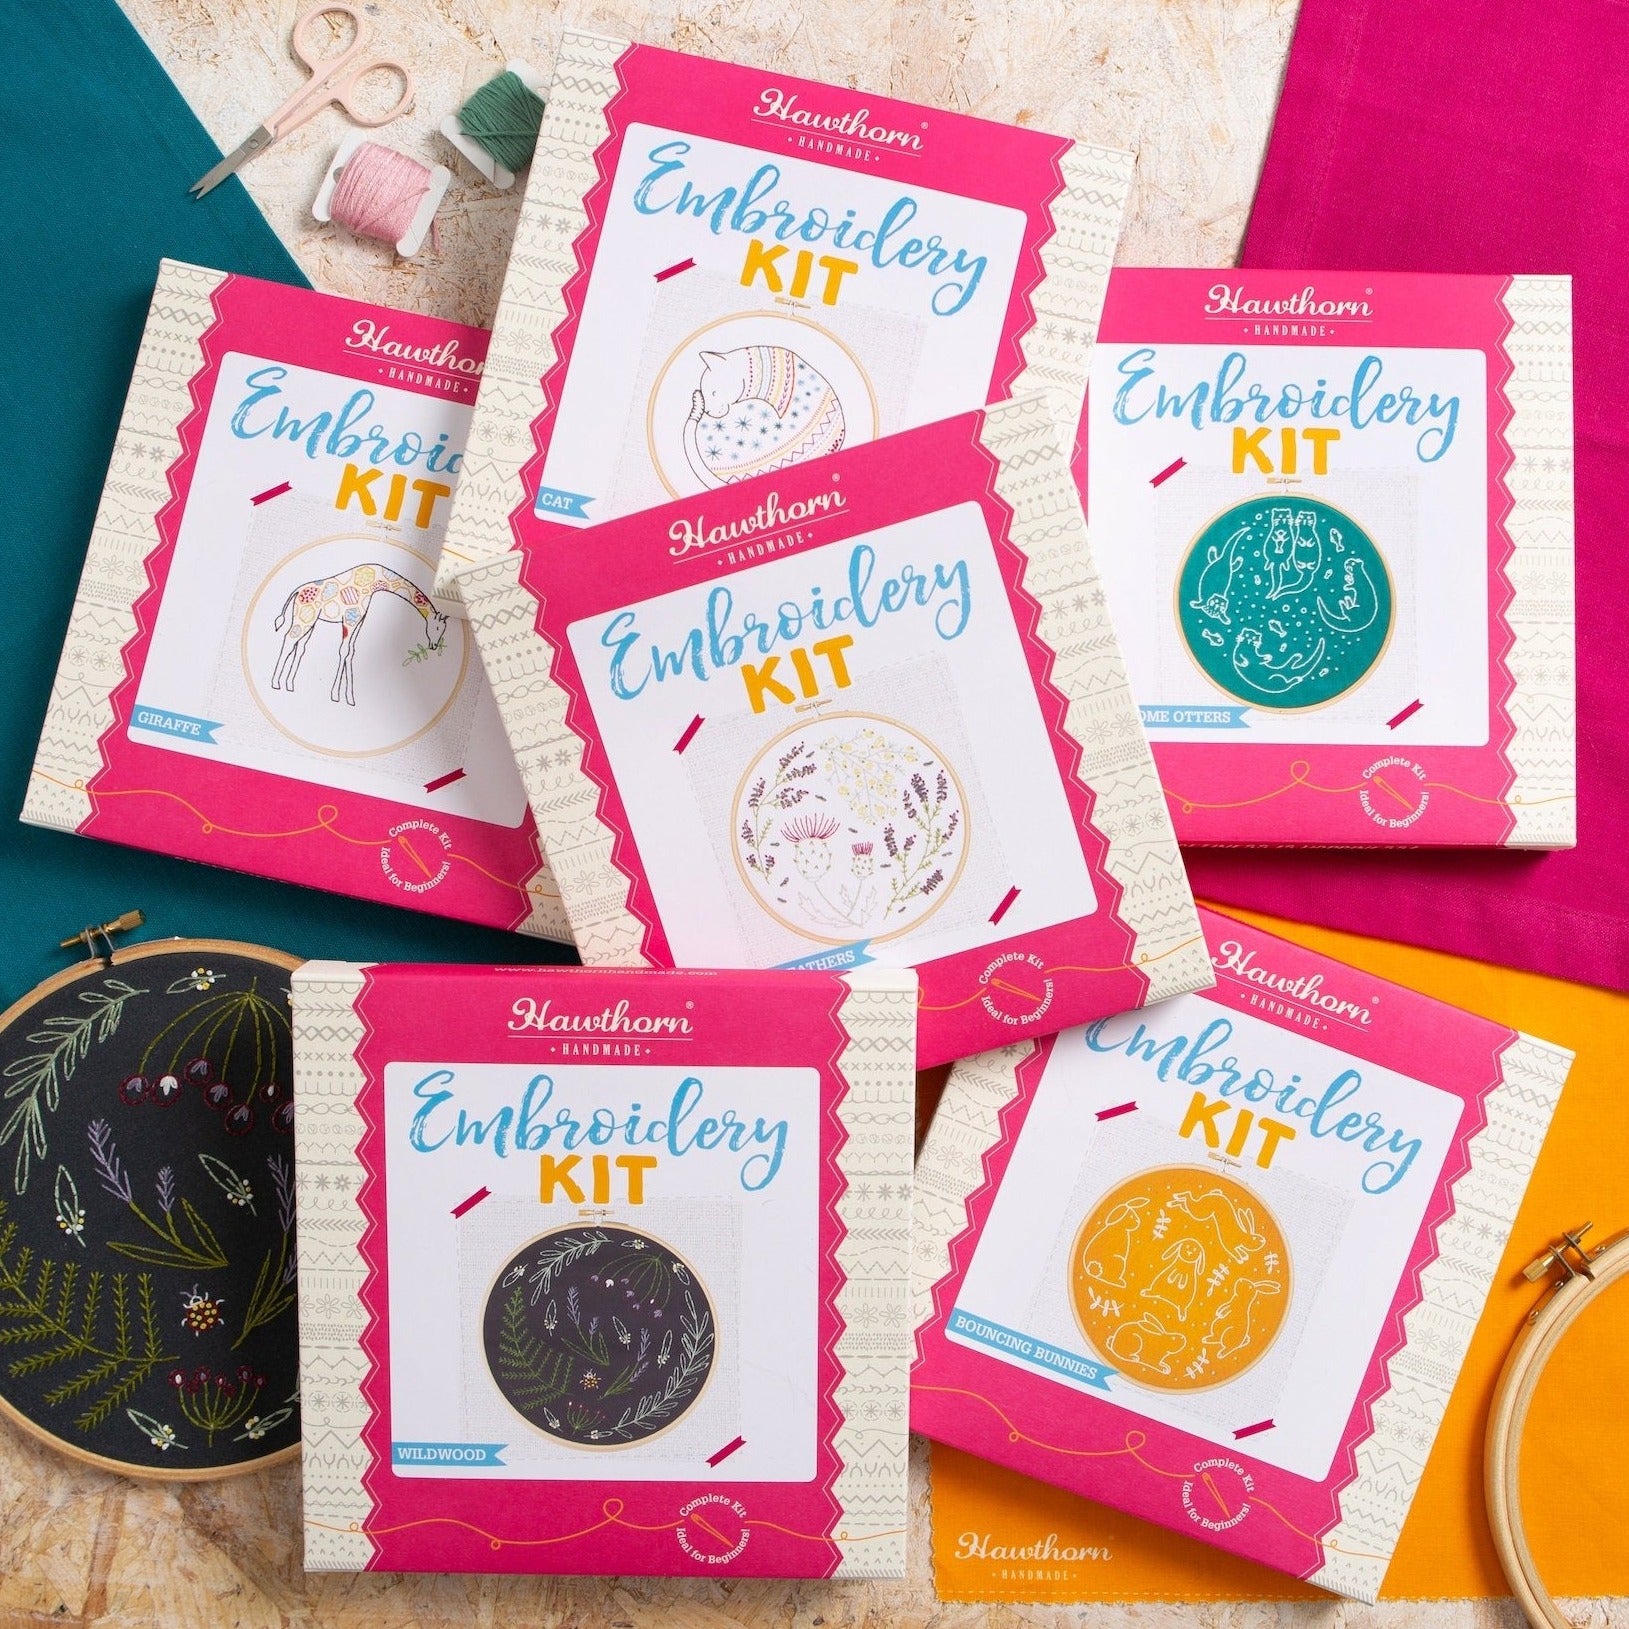 Six embroidery kit boxes displayed with one botanical embroidery kit and an empty hoop on a colourful background.